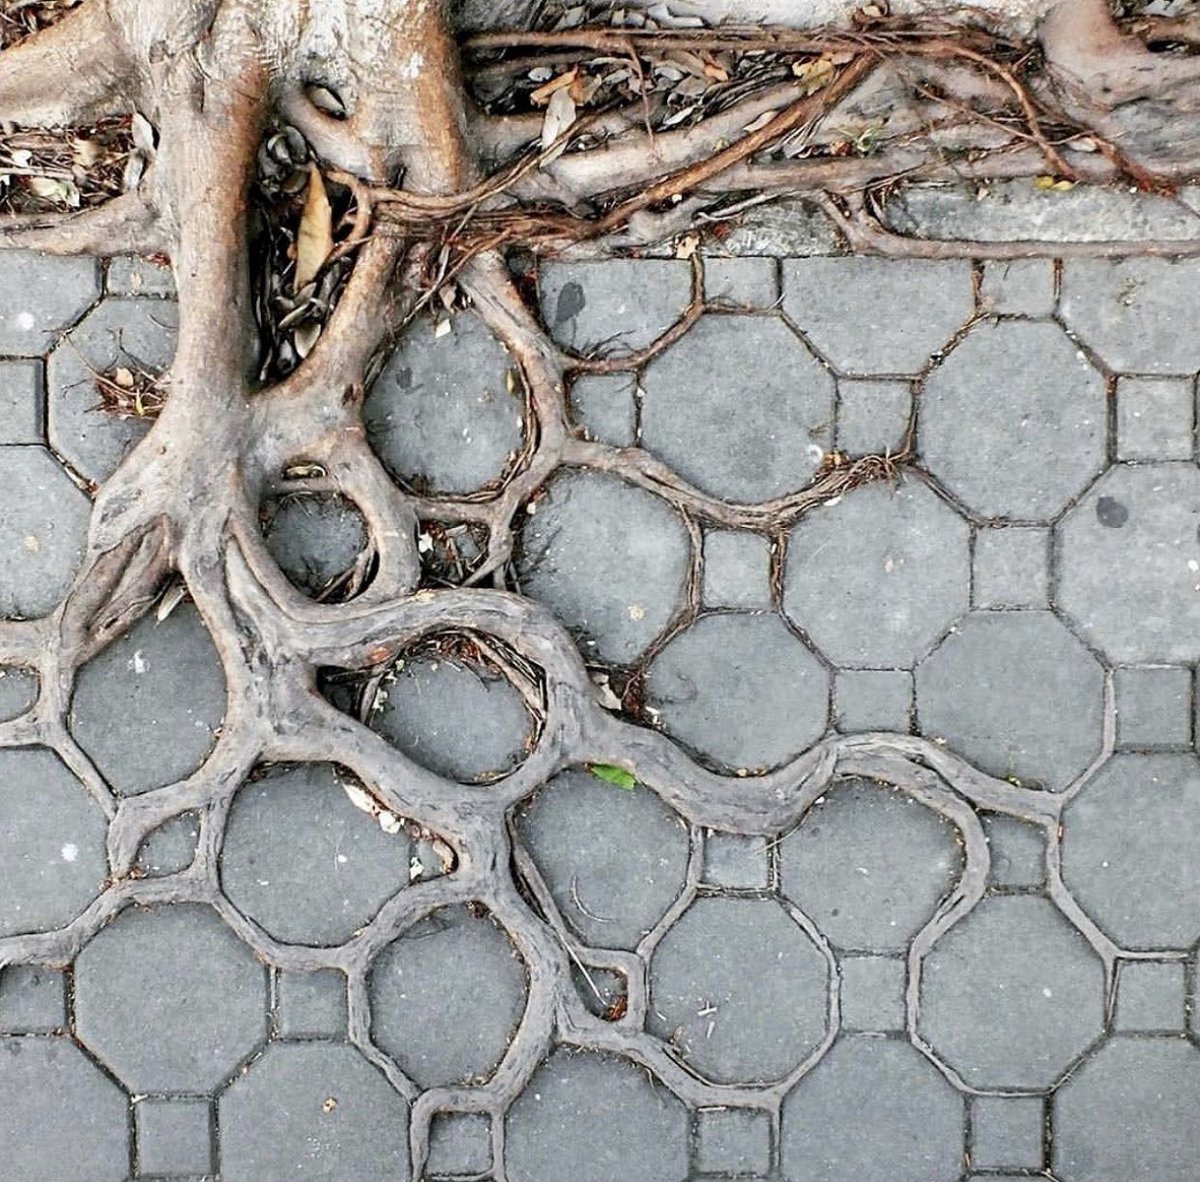 21. Nature always finds a way